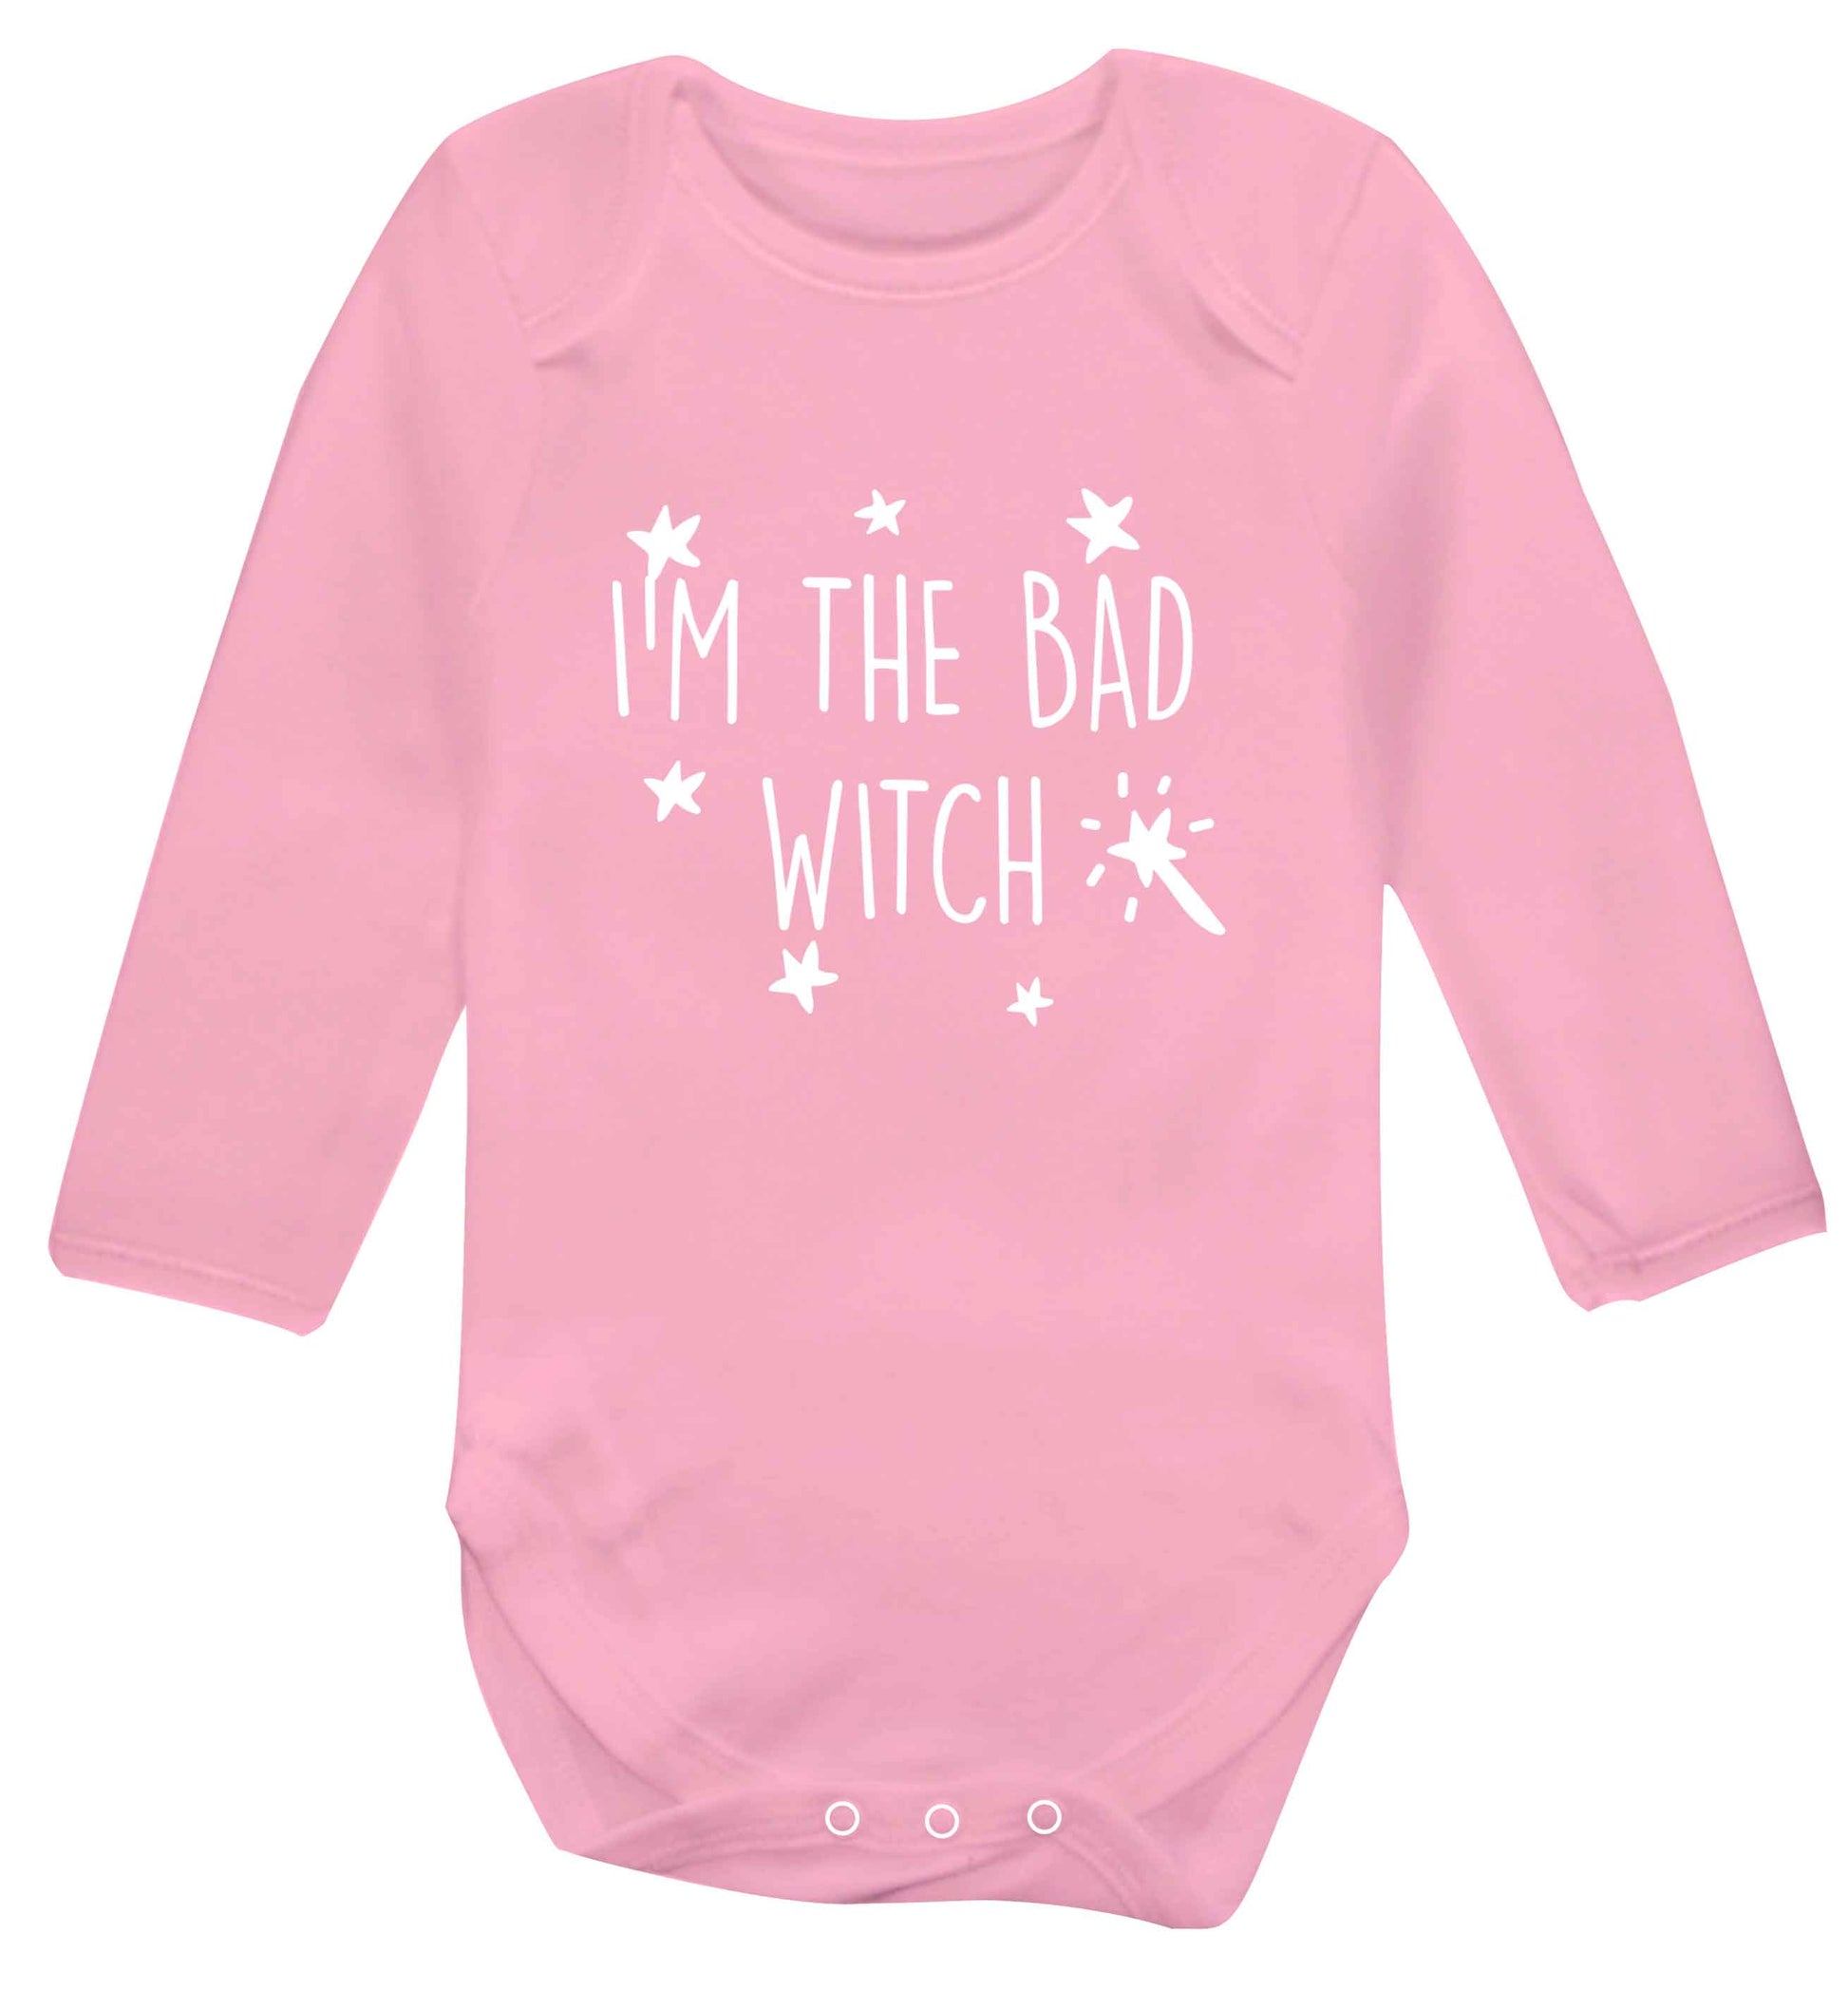 Bad witch baby vest long sleeved pale pink 6-12 months